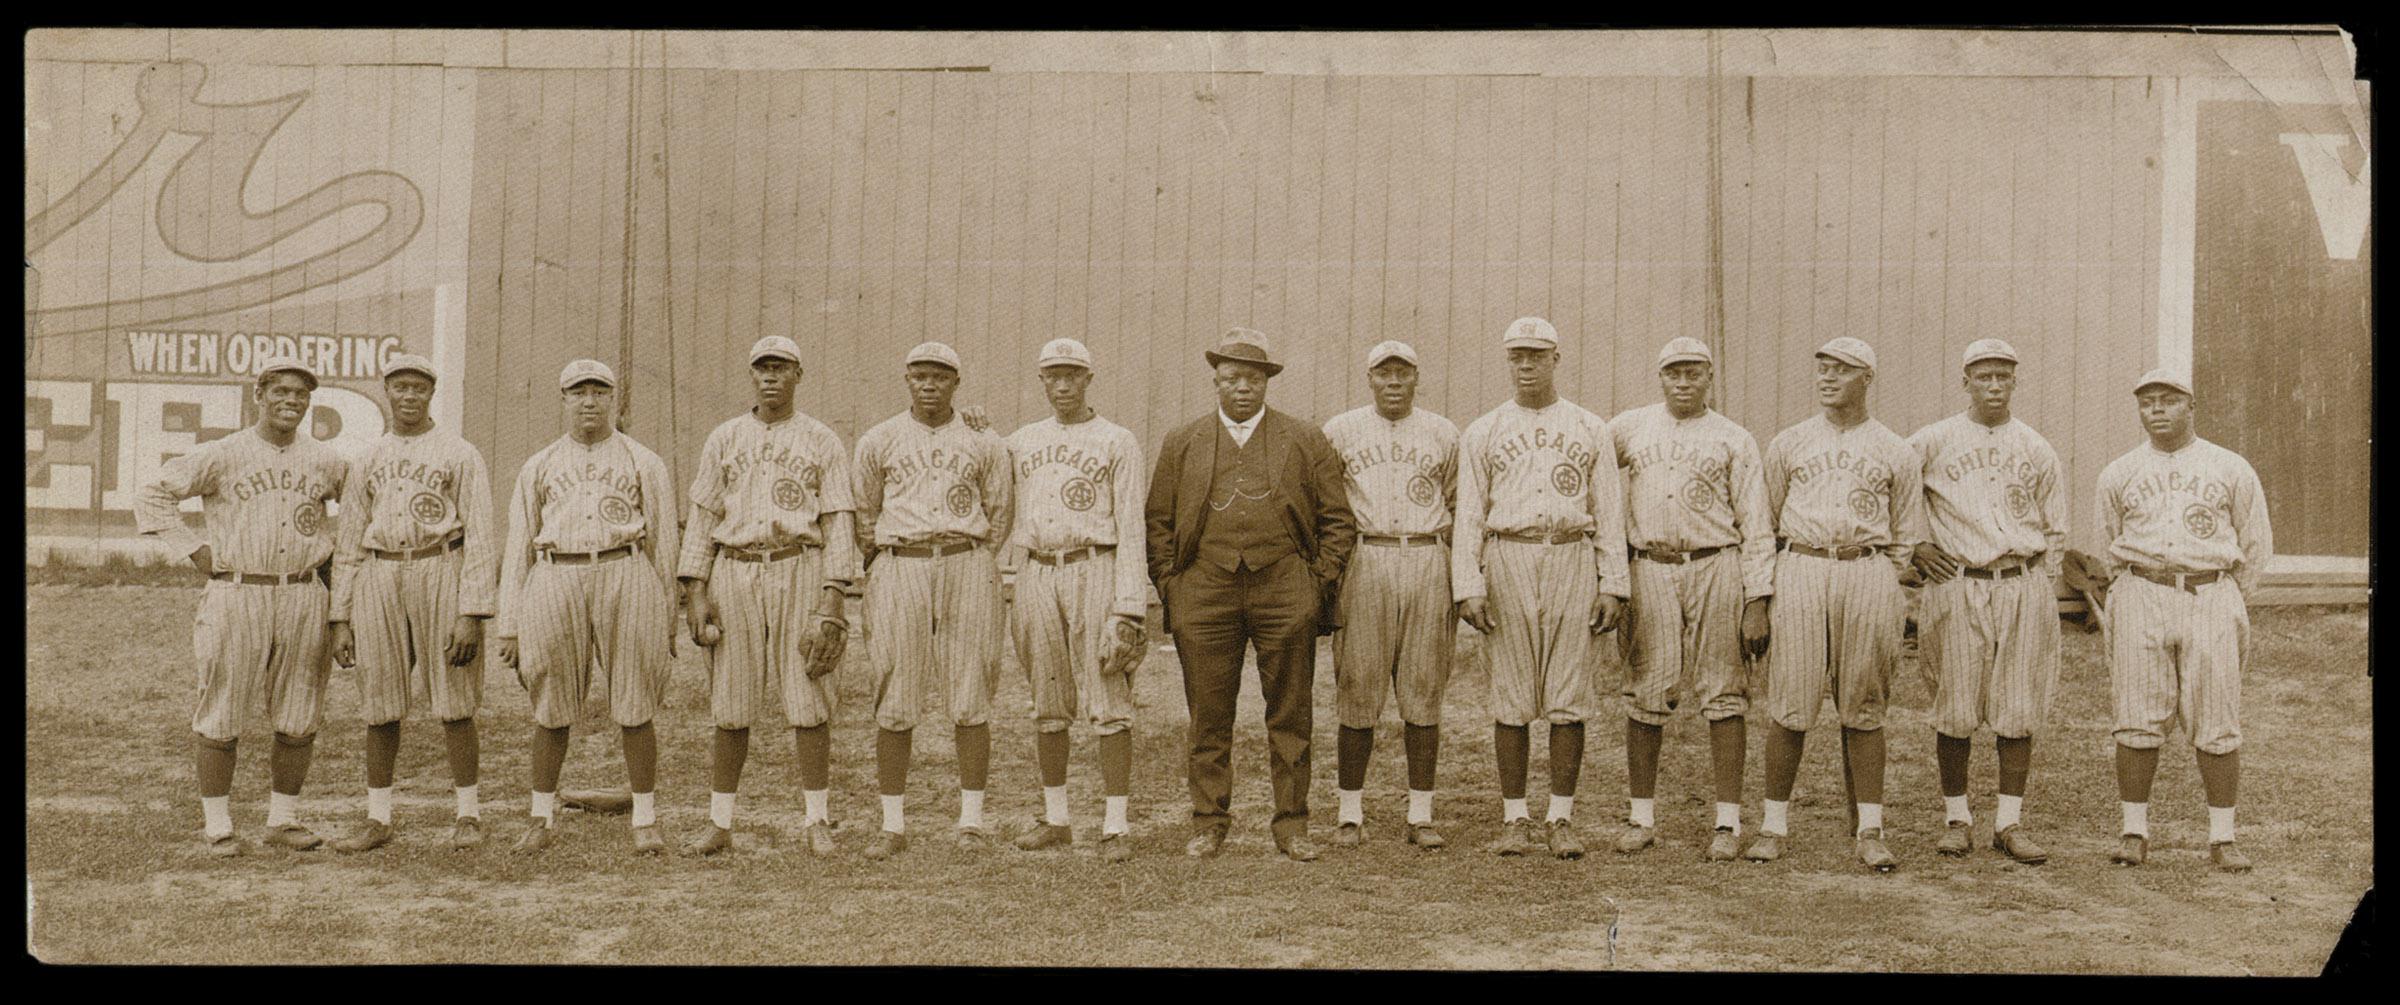 1916 Chicago American Giants Society for American